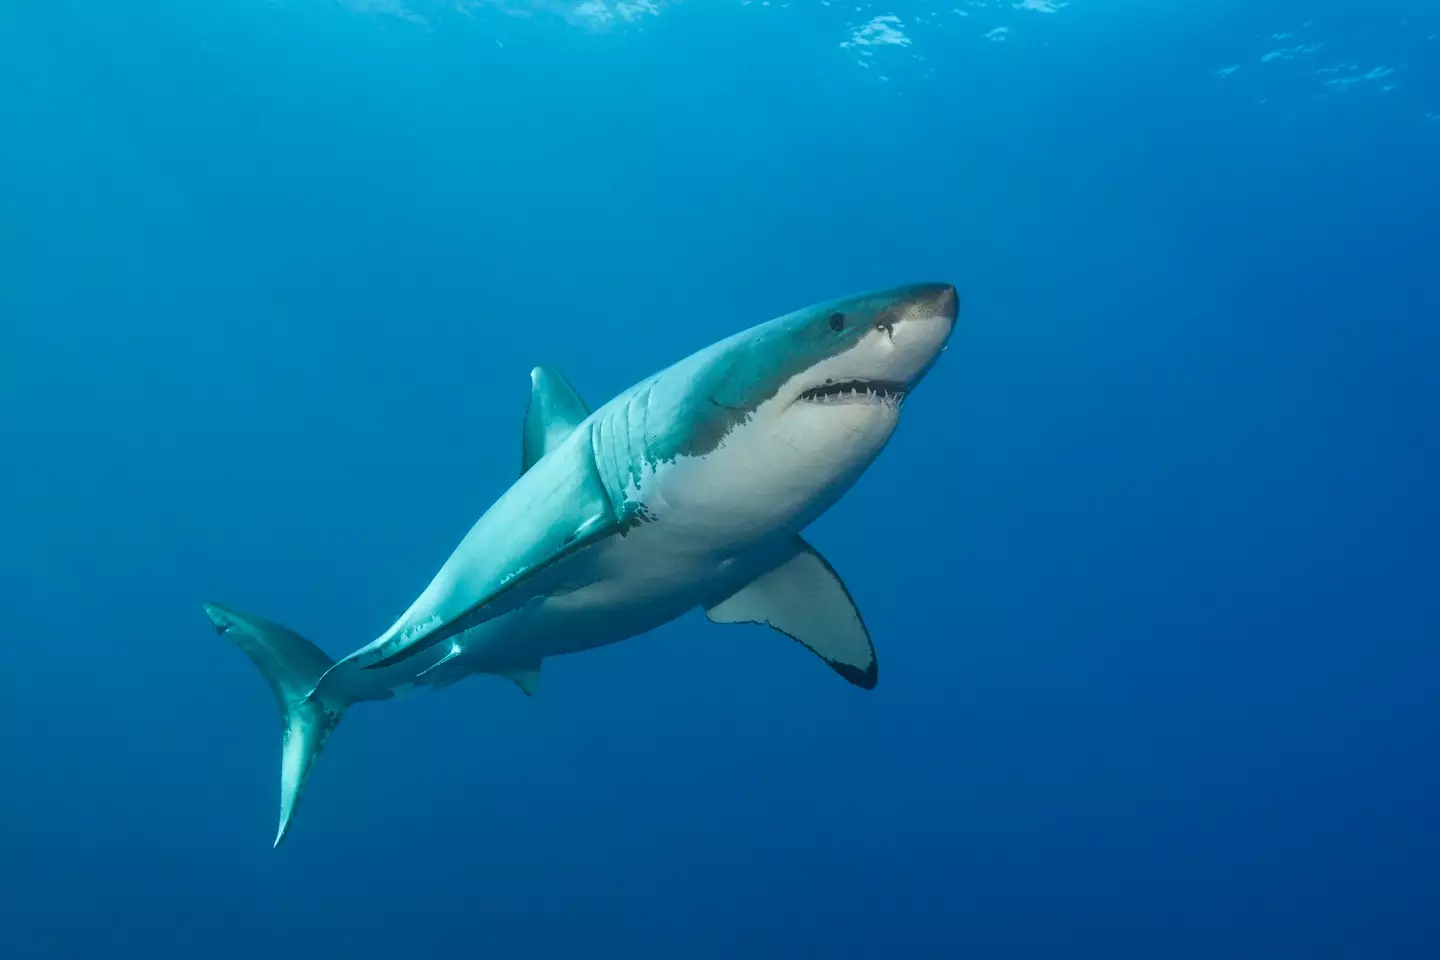 This is what the shark will look like one day, what a transformation.